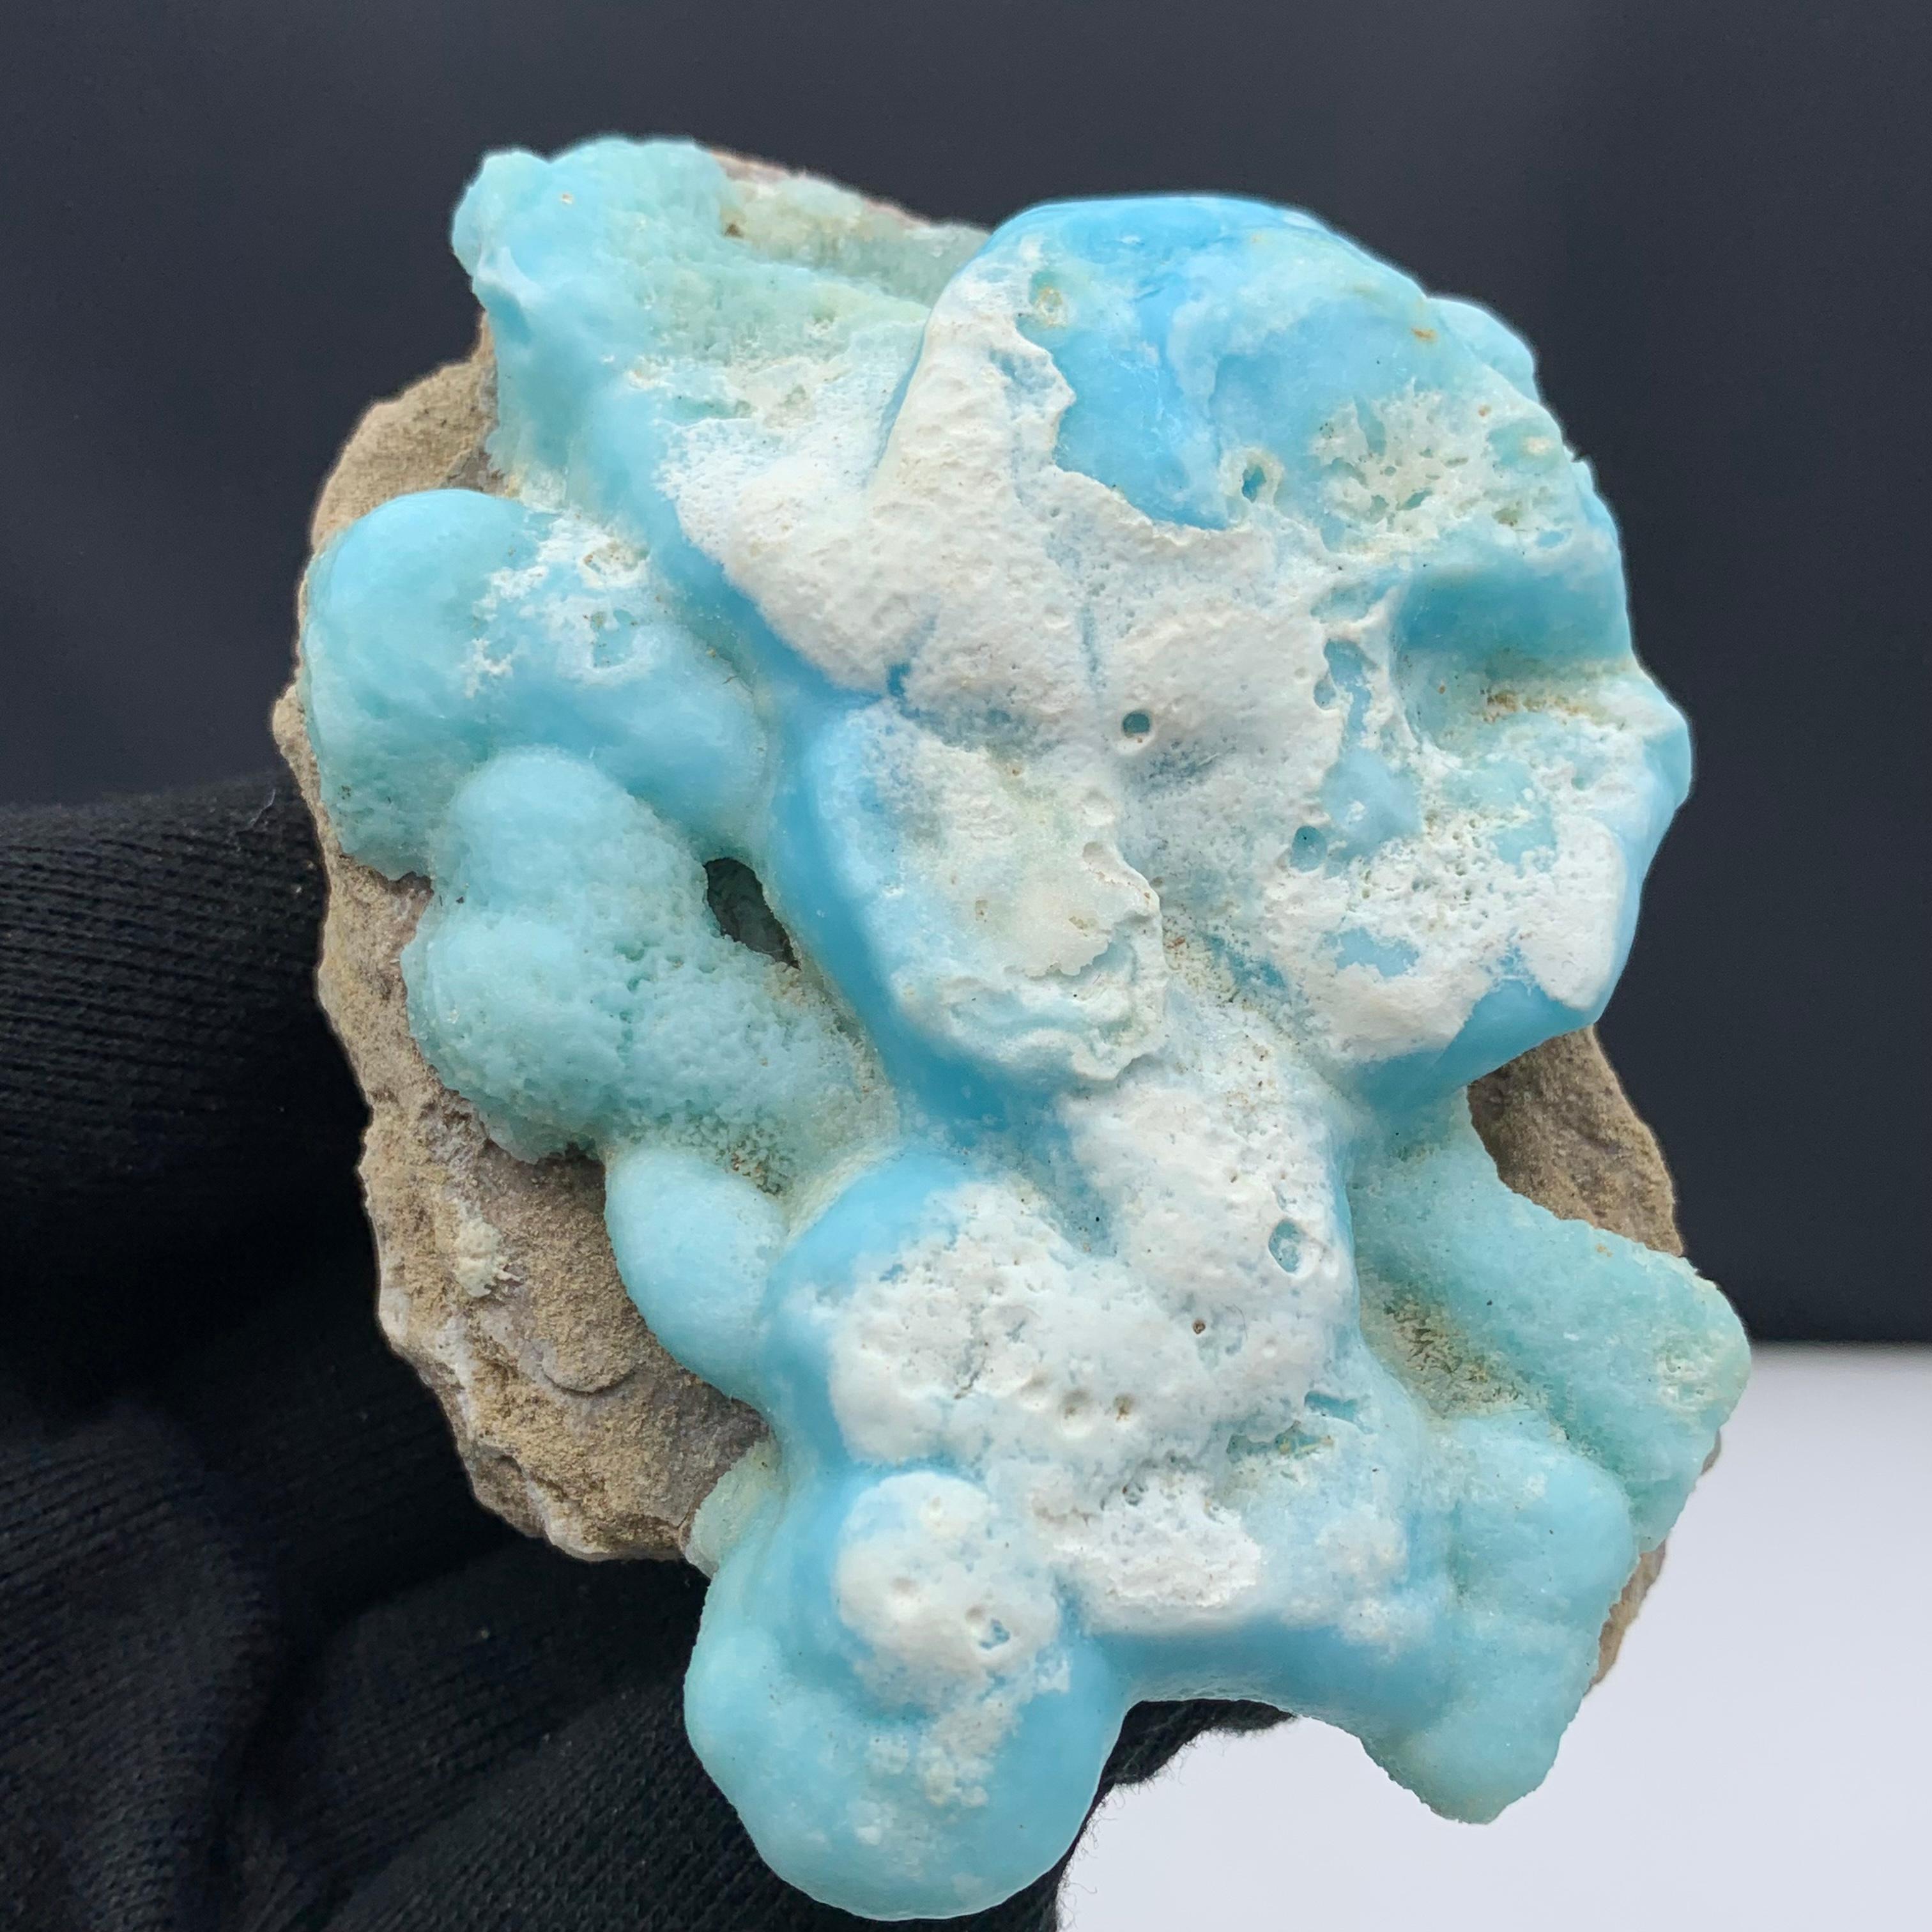 Adorable Botryoidal Aragonite Crystal On Matrix From Afghanistan 
Weight: 258 Gram 
Dimension: 9.5 x 7.3 x 4.3 Cm 
Origin : Hilmand, Afghanistan 

Blue Aragonite enhances emotional perception and increases empathy and compassion towards ourselves